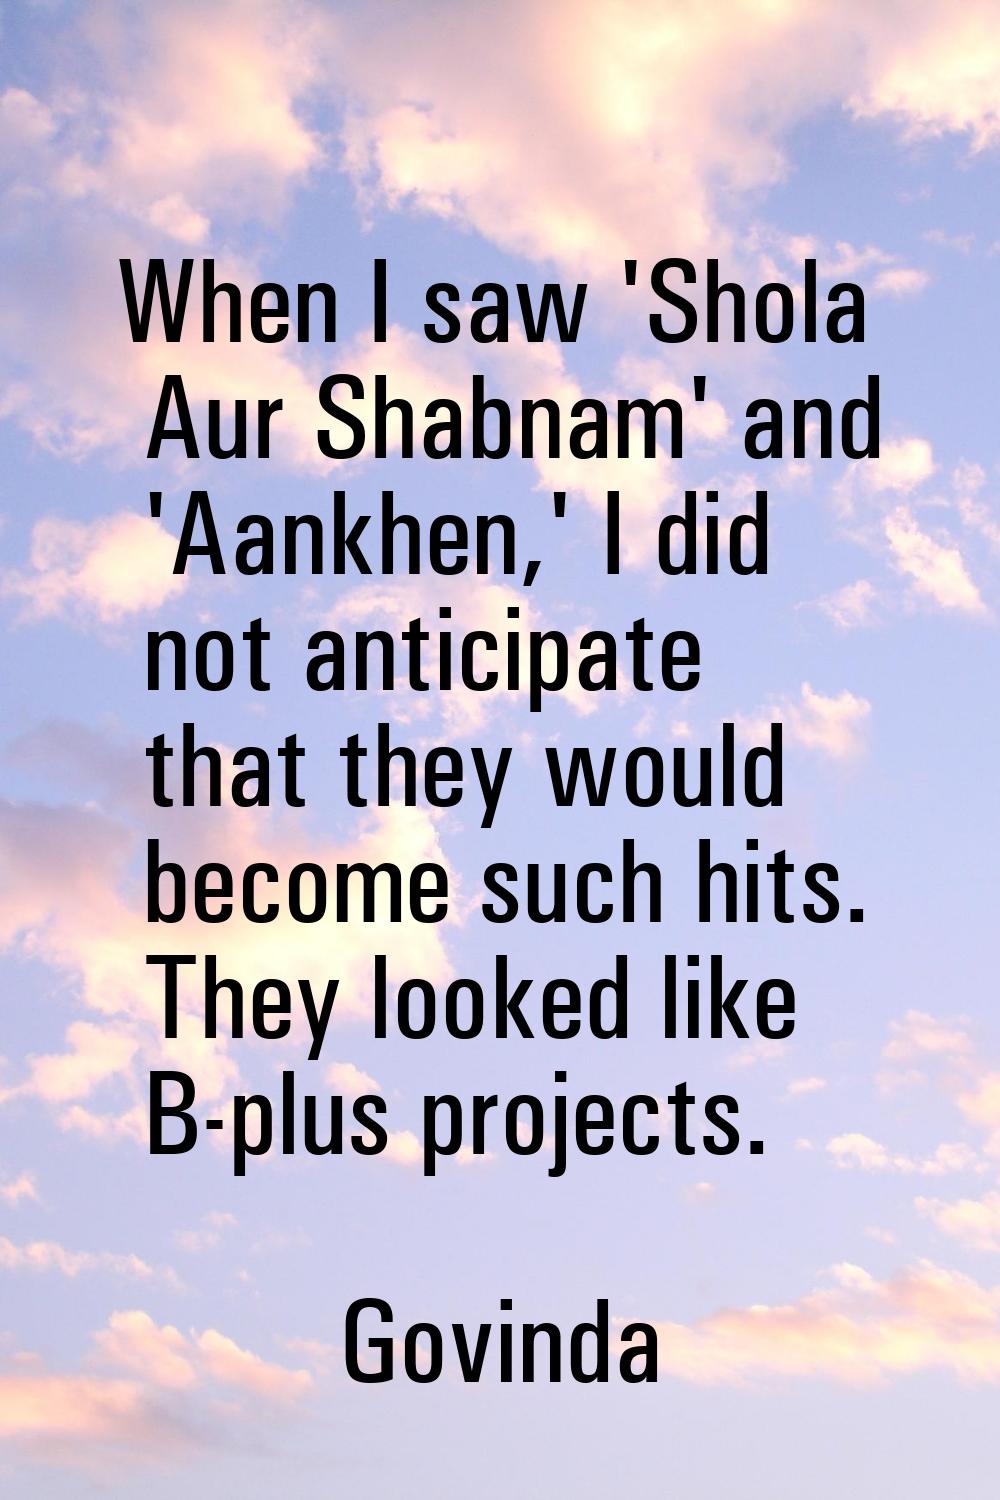 When I saw 'Shola Aur Shabnam' and 'Aankhen,' I did not anticipate that they would become such hits